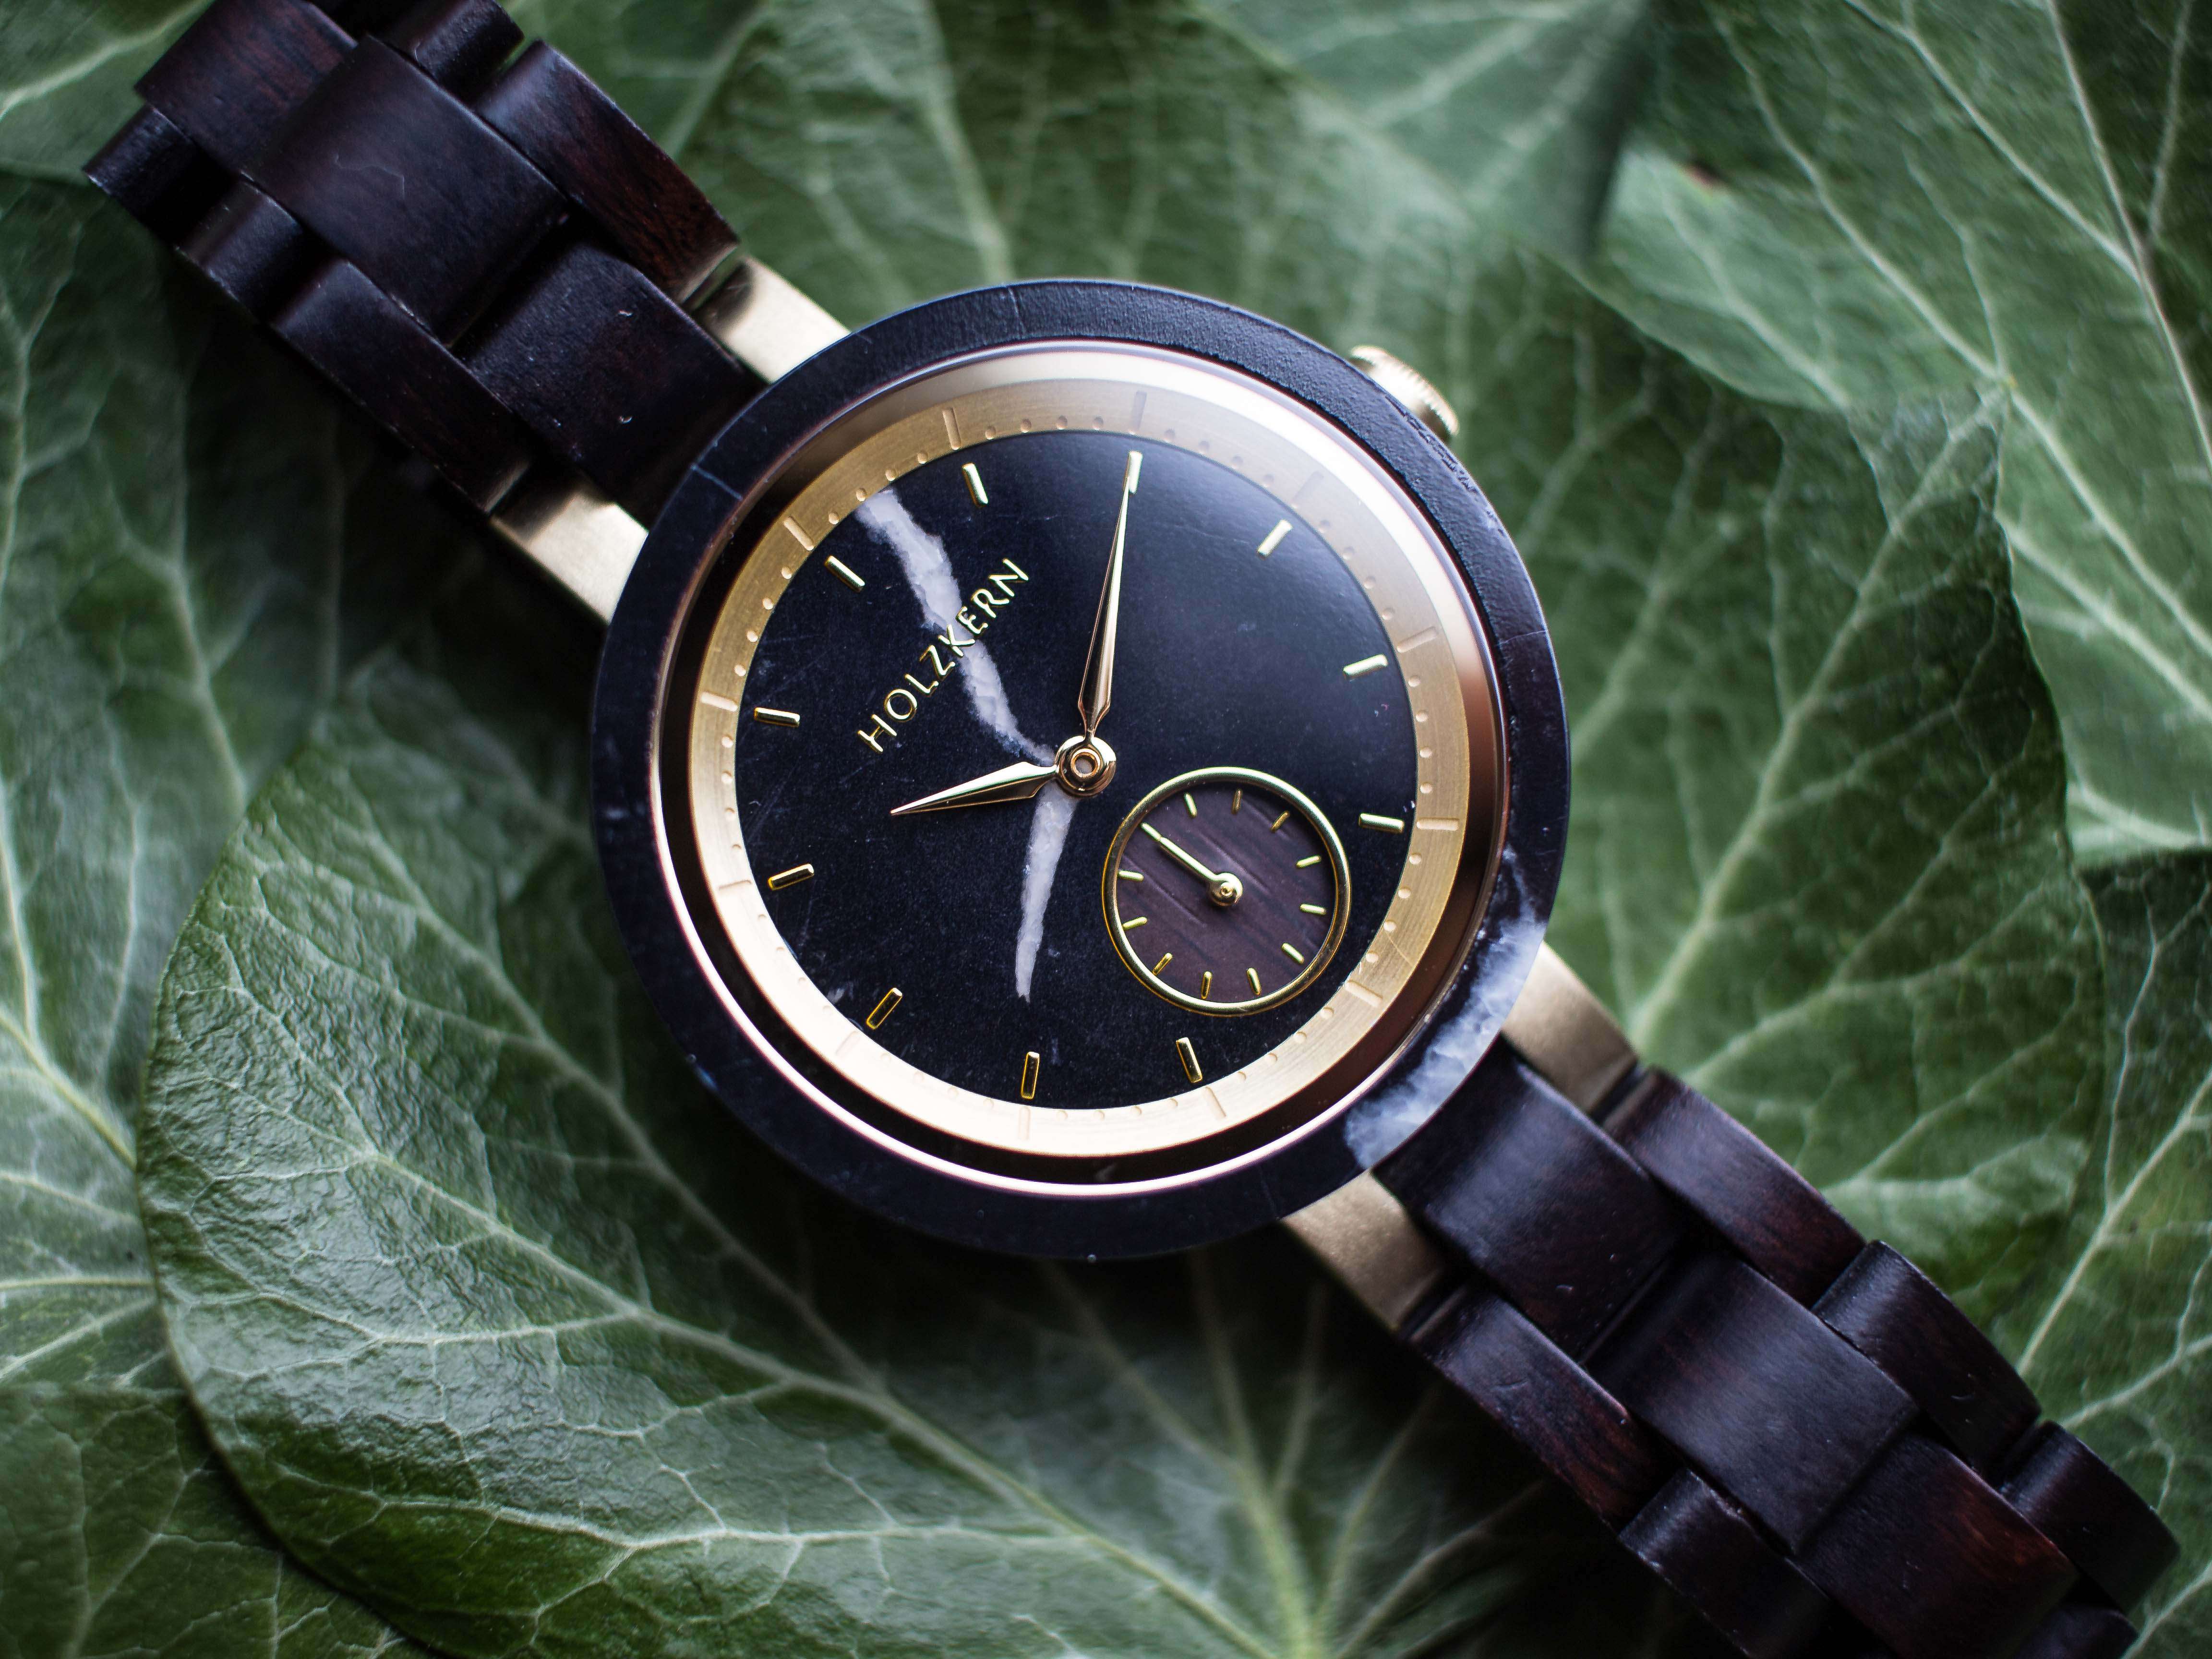 Taboola Ad Example 59735 - Holzkern, The Market Leader For Wooden Watches Has A New Collection